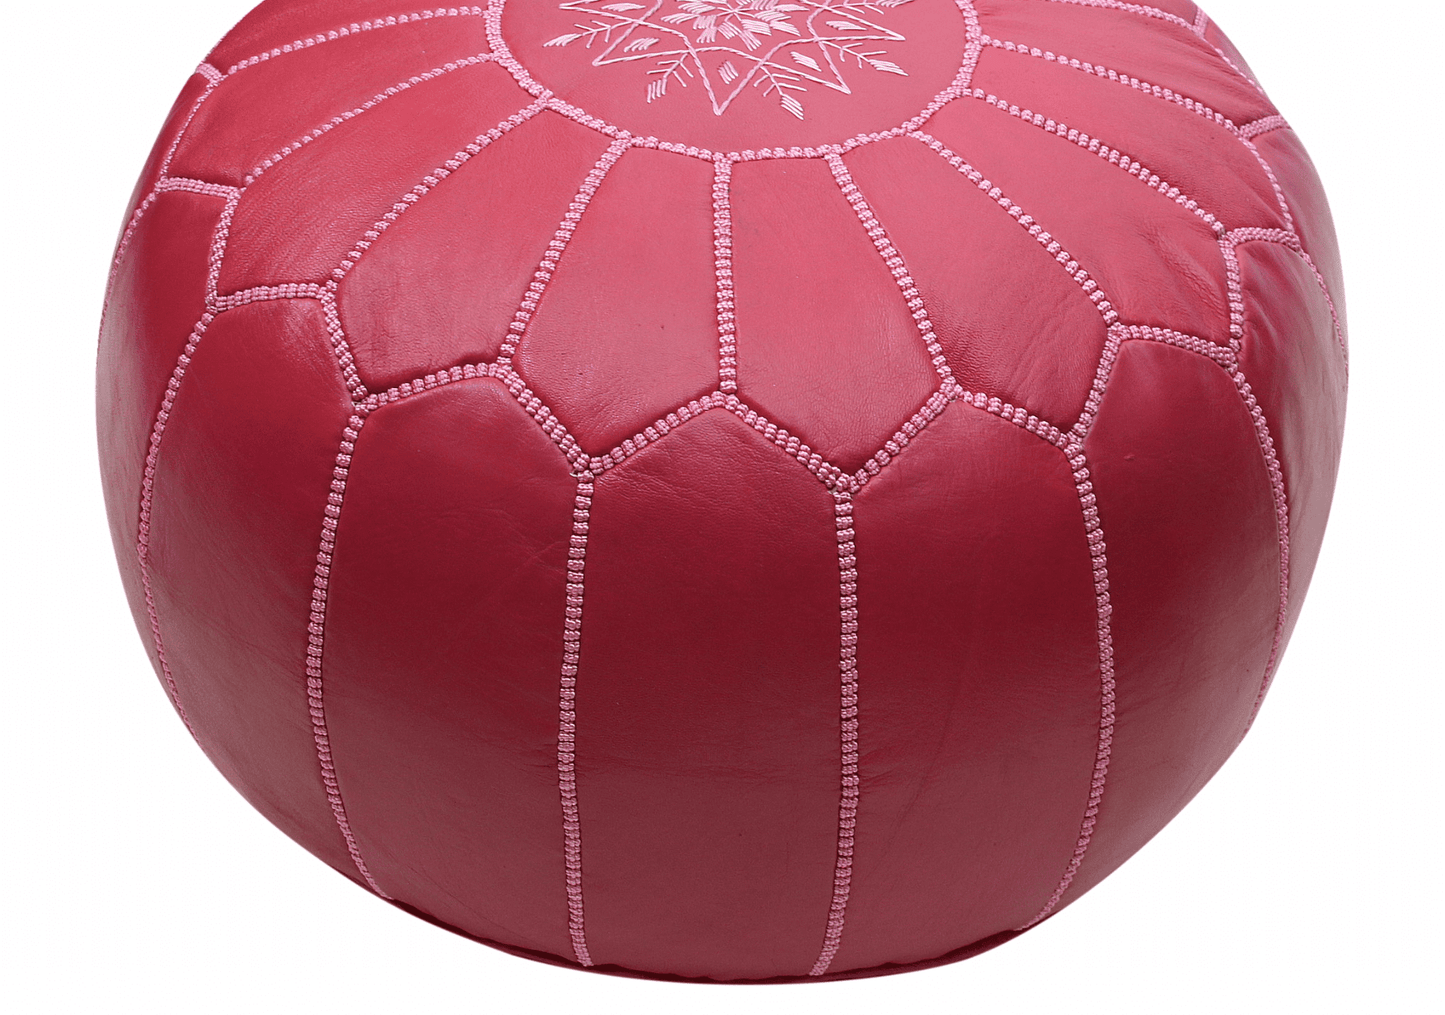 moroccan-pouffe-pouf-ottoman-footstool-cover-only-or-stuffed-pink-rose-leather